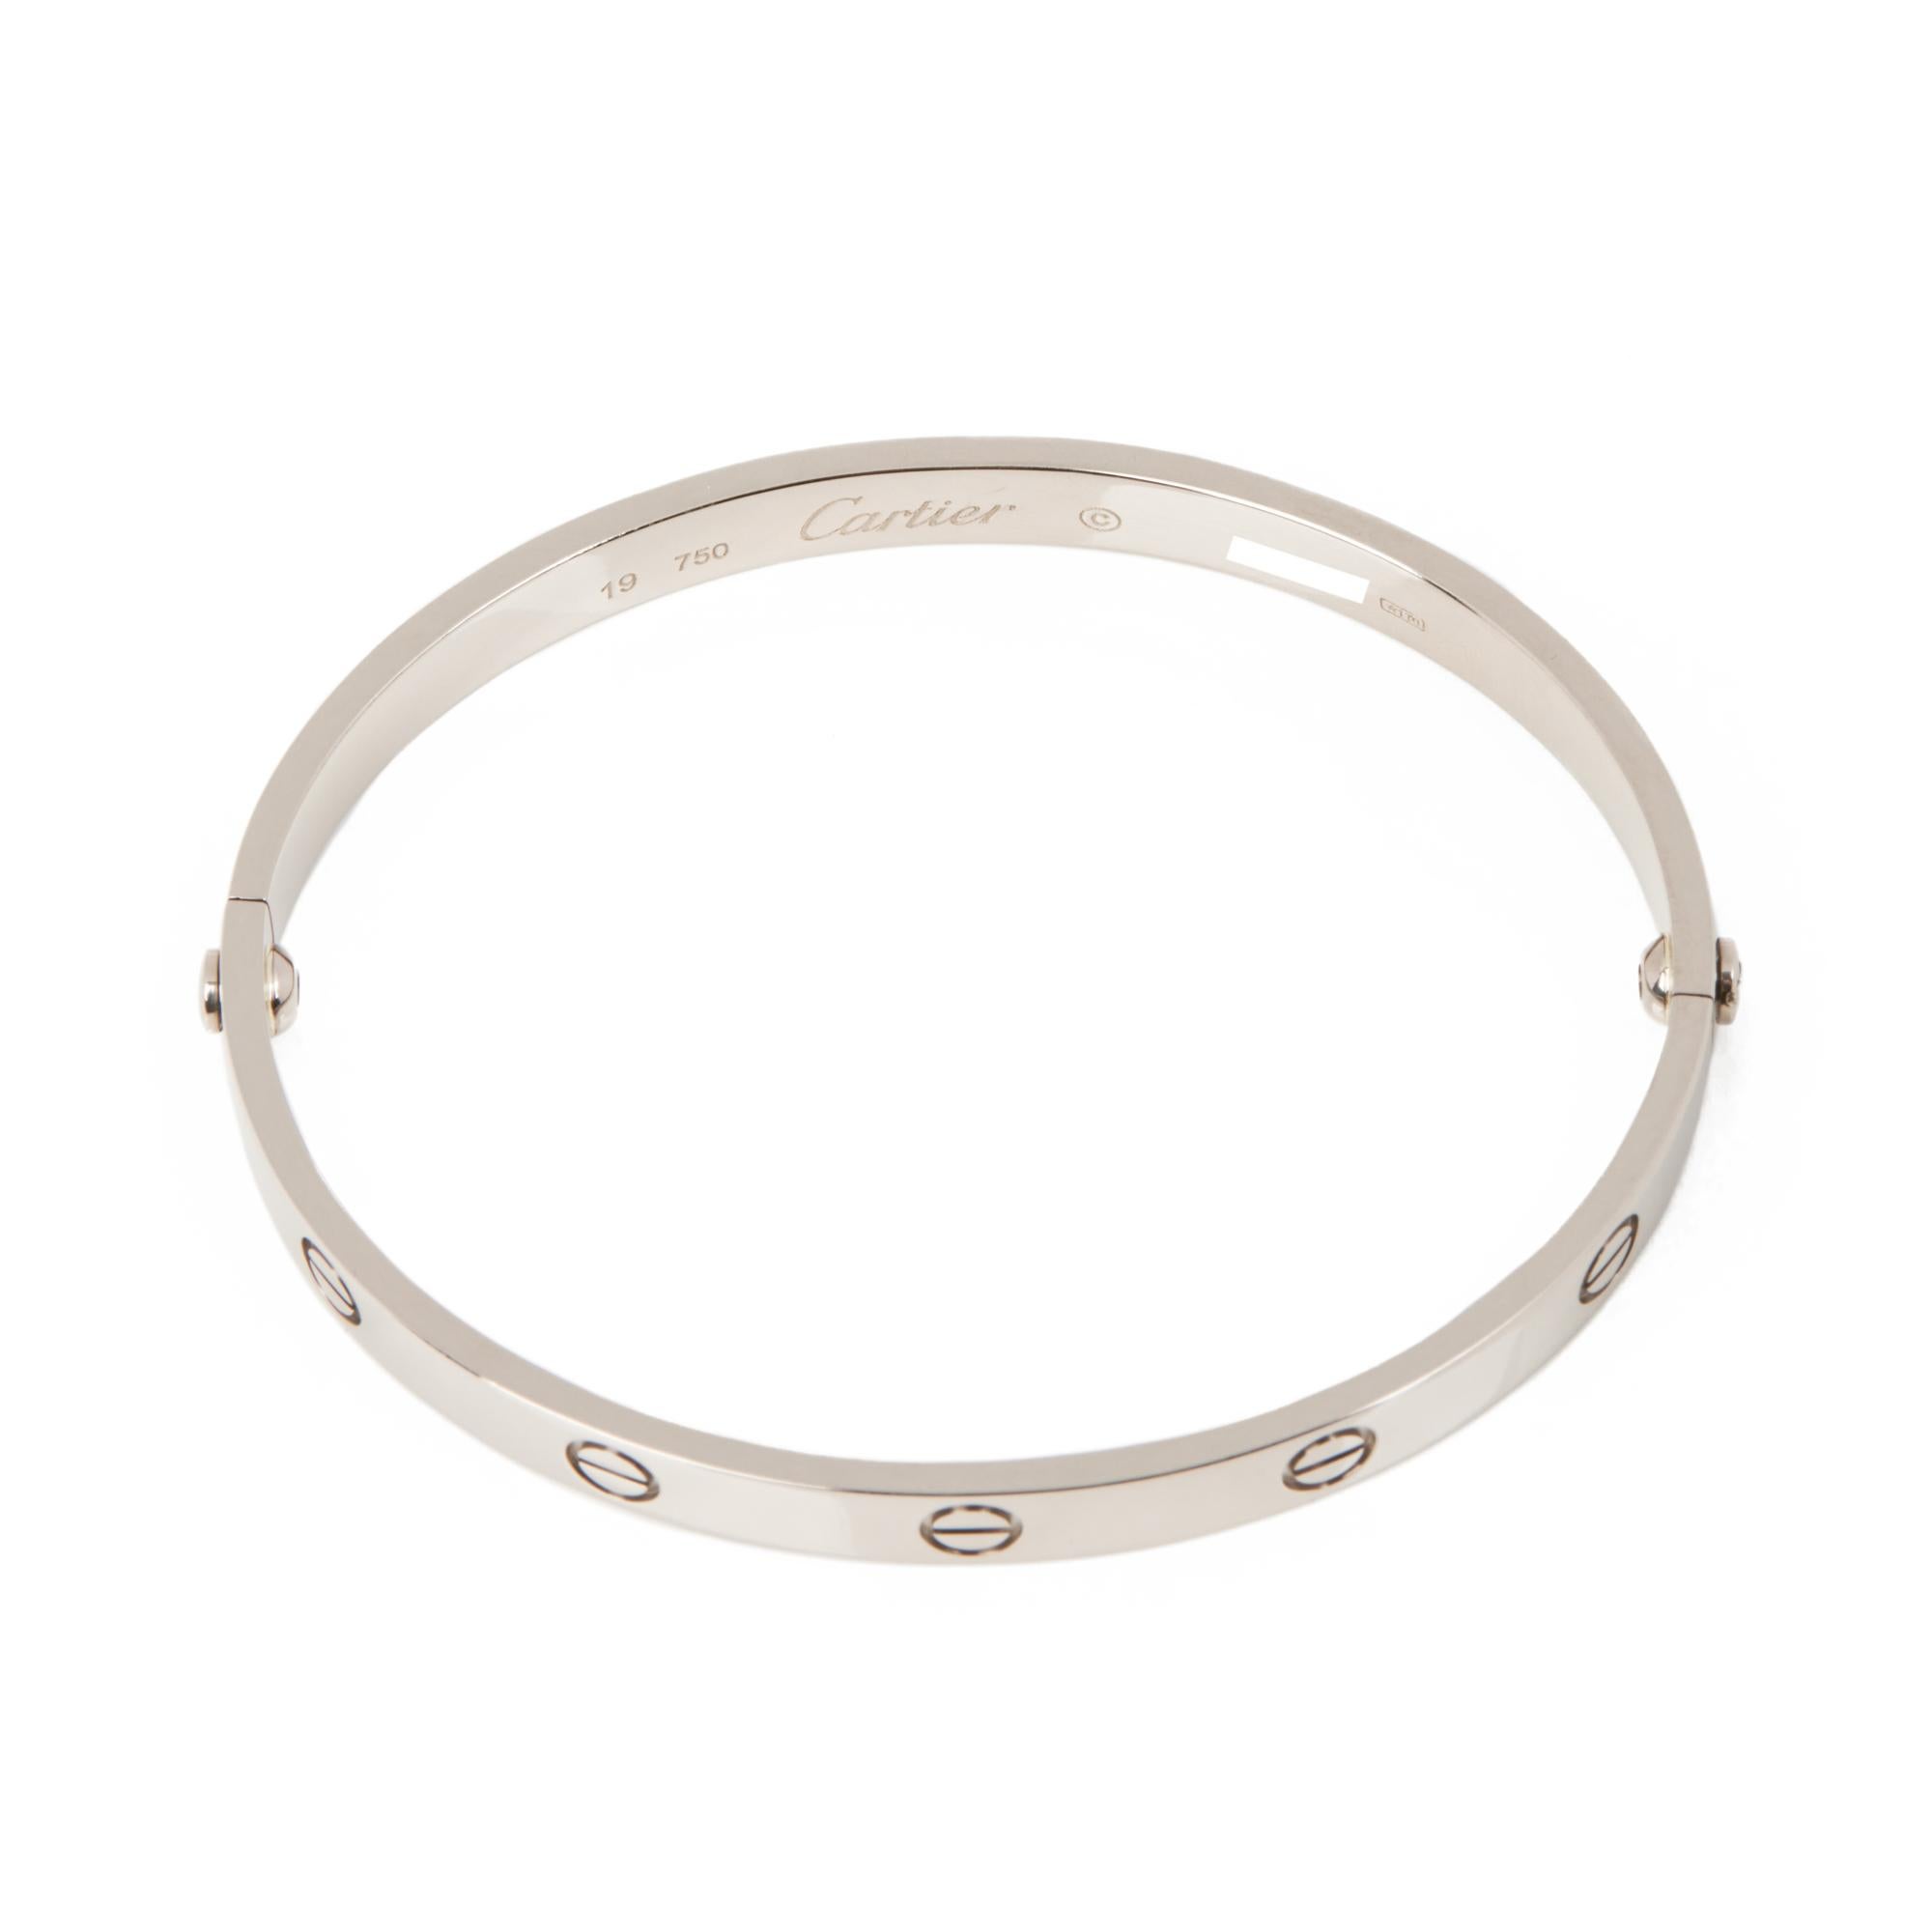 This bangle by Cartier is from their Love Collection and features the original screw fastening. Accompanied by a Cartier Box, Screwdriver and Certificate. Our Xupes reference is J917 should you need to quote this.

RRP	£6,300
ITEM